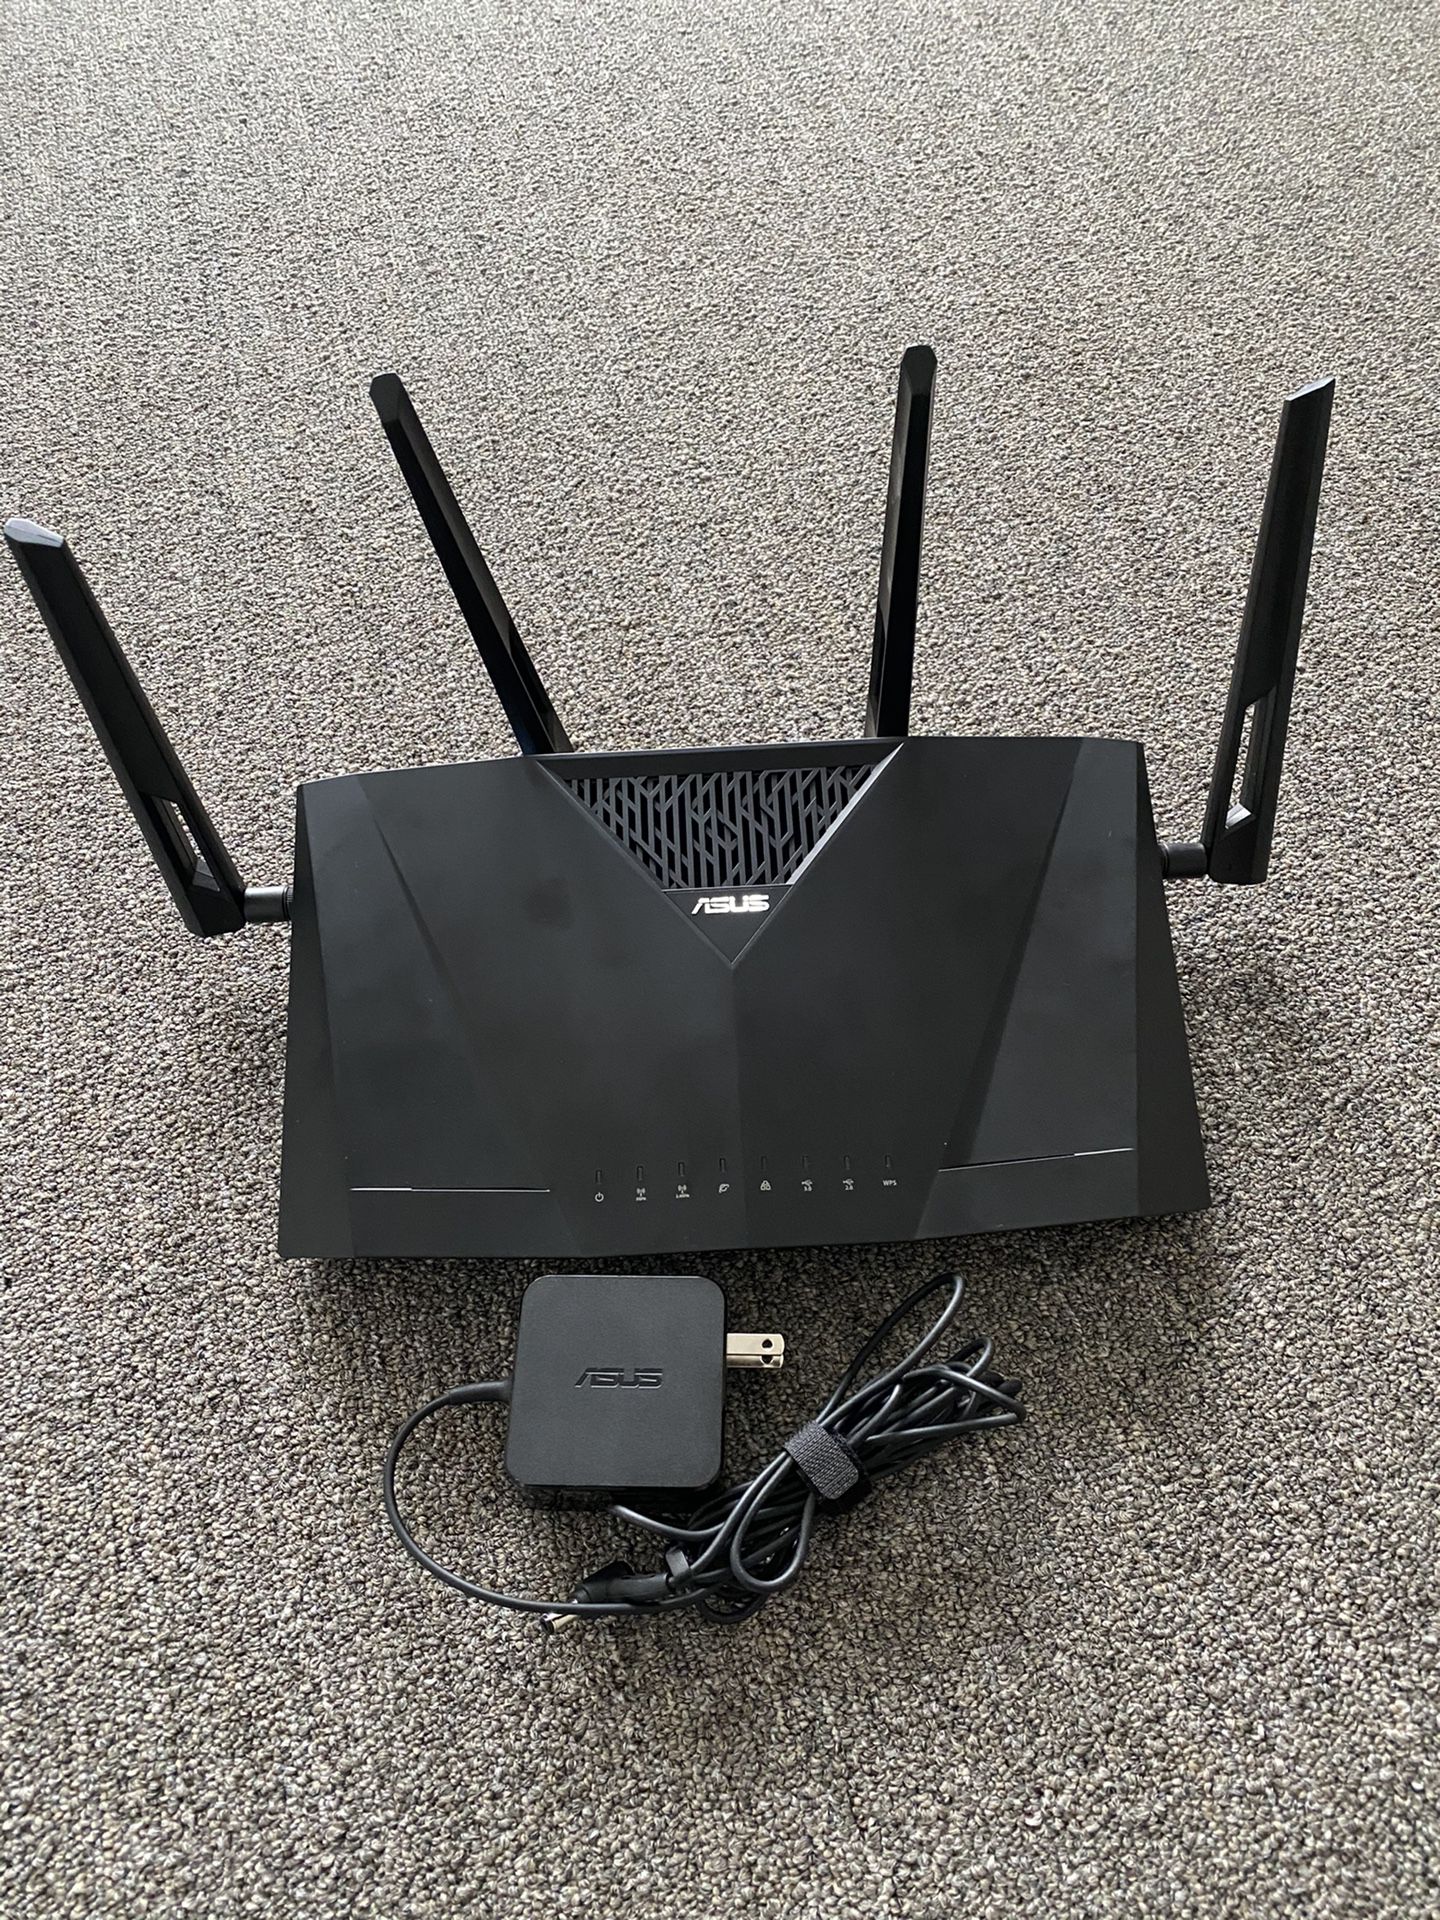 Asus router RT-AC3100